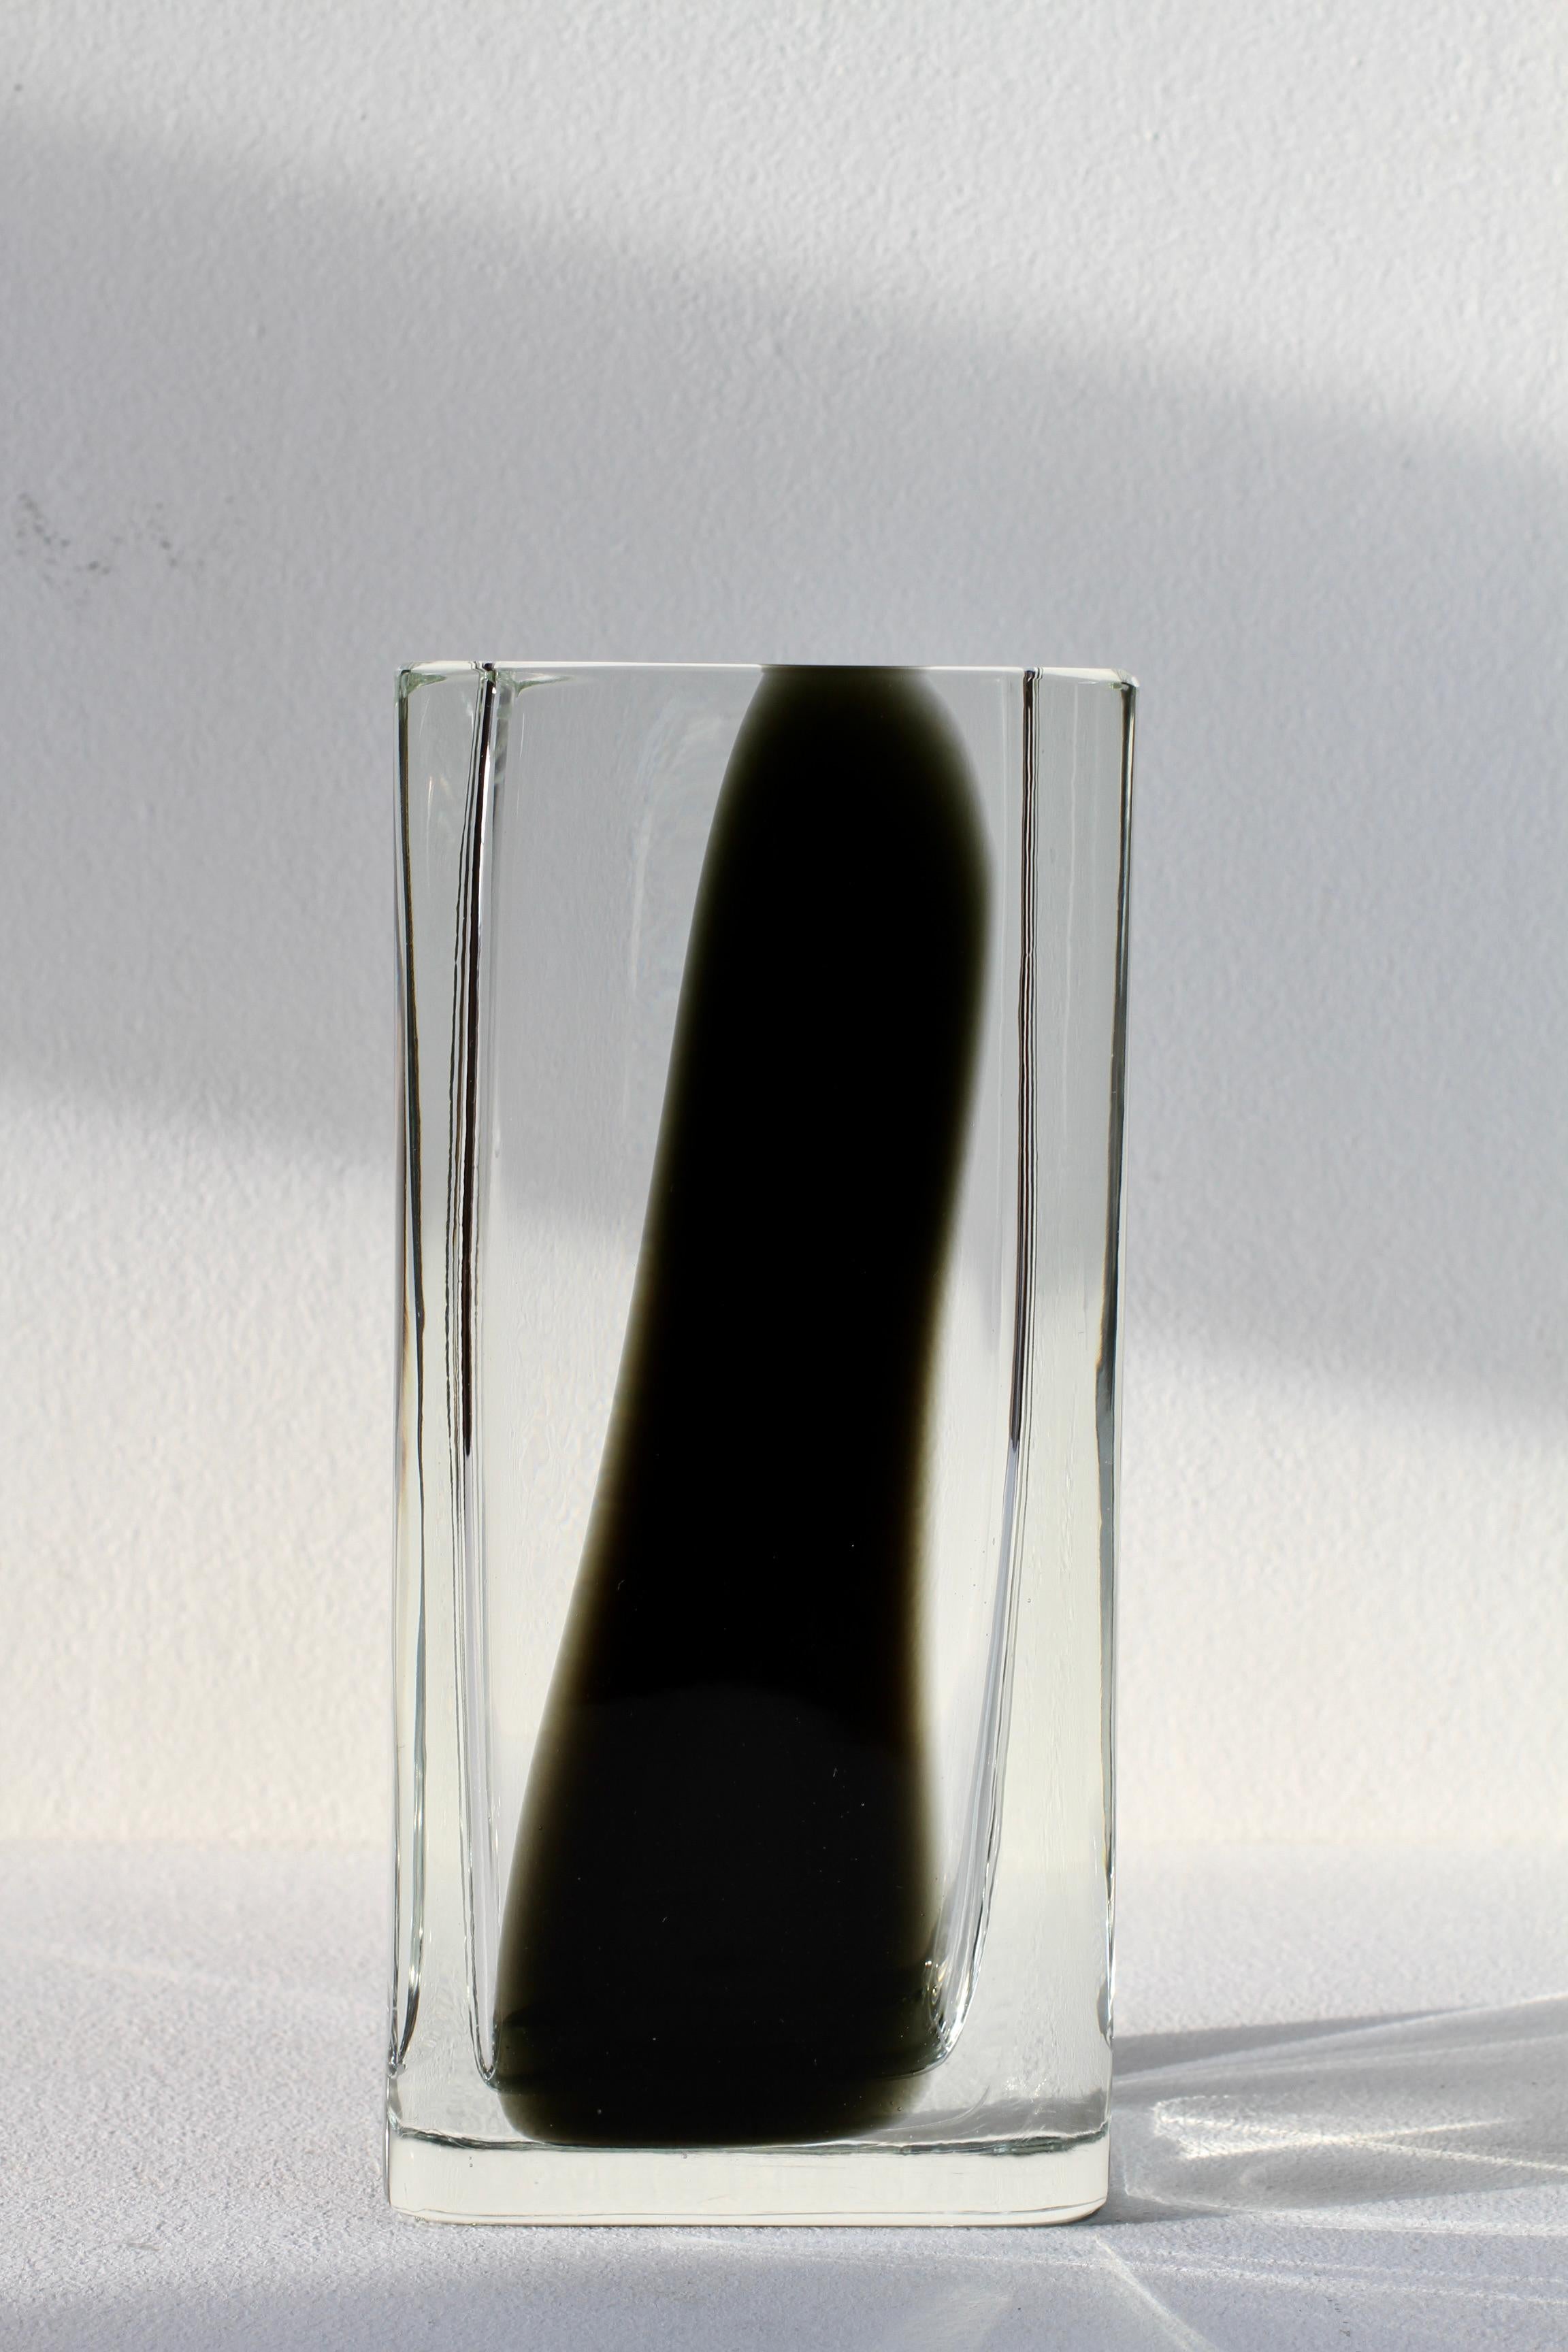 Antonio da Ros for Cenedese large, heavy and elegant vintage Mid-Century modern Italian Murano tall, large and square glass vase, circa 1965-1975. This rare, large and heavy piece of glass features a simplistic, elegant form and design in thick